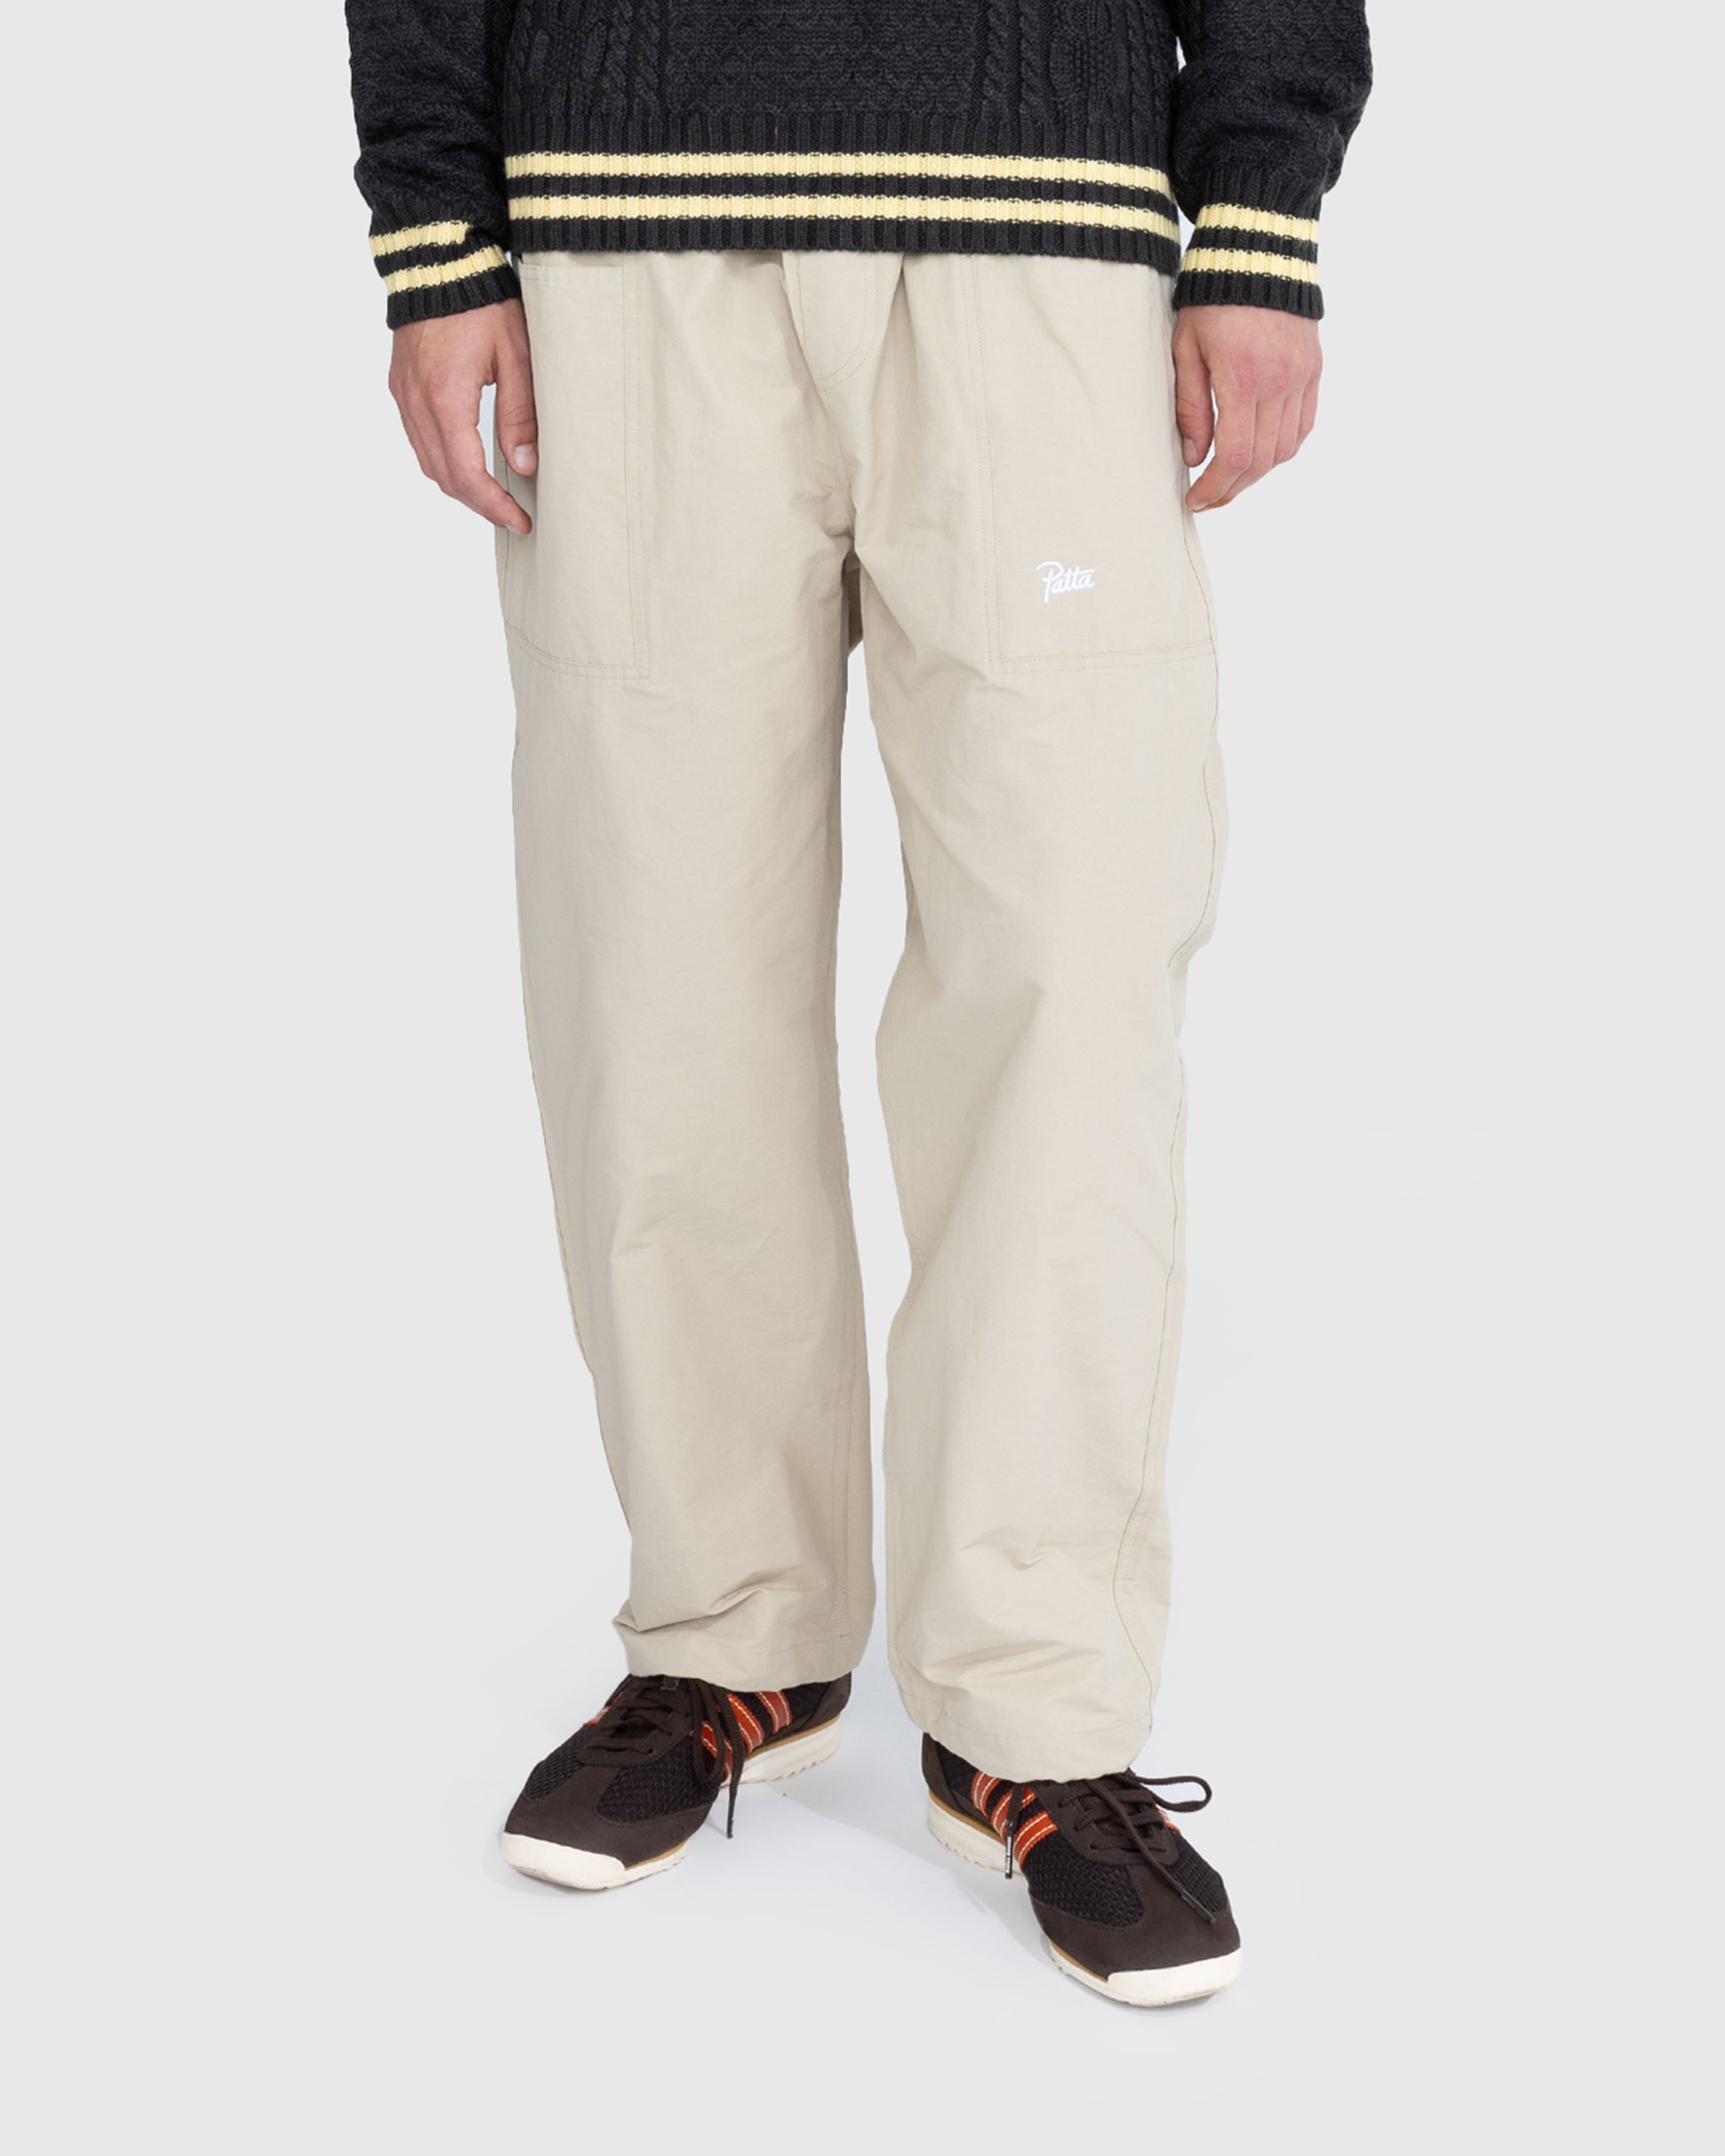 Patta - BELTED TACTICAL CHINO White - Clothing - White - Image 2